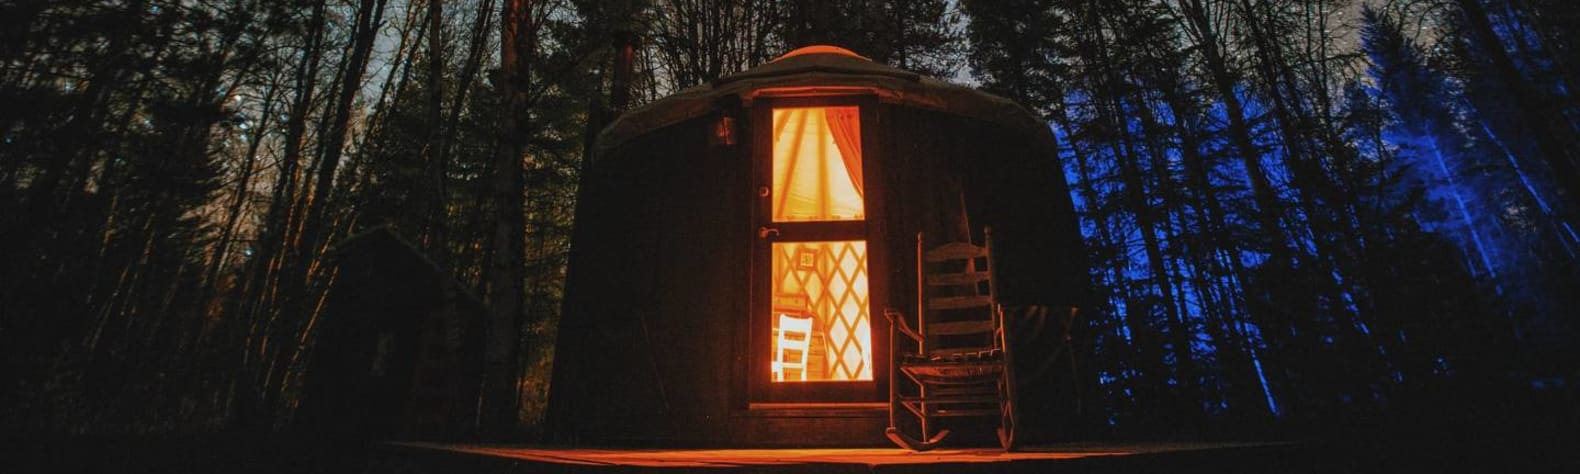 Small Yurt in the Woods